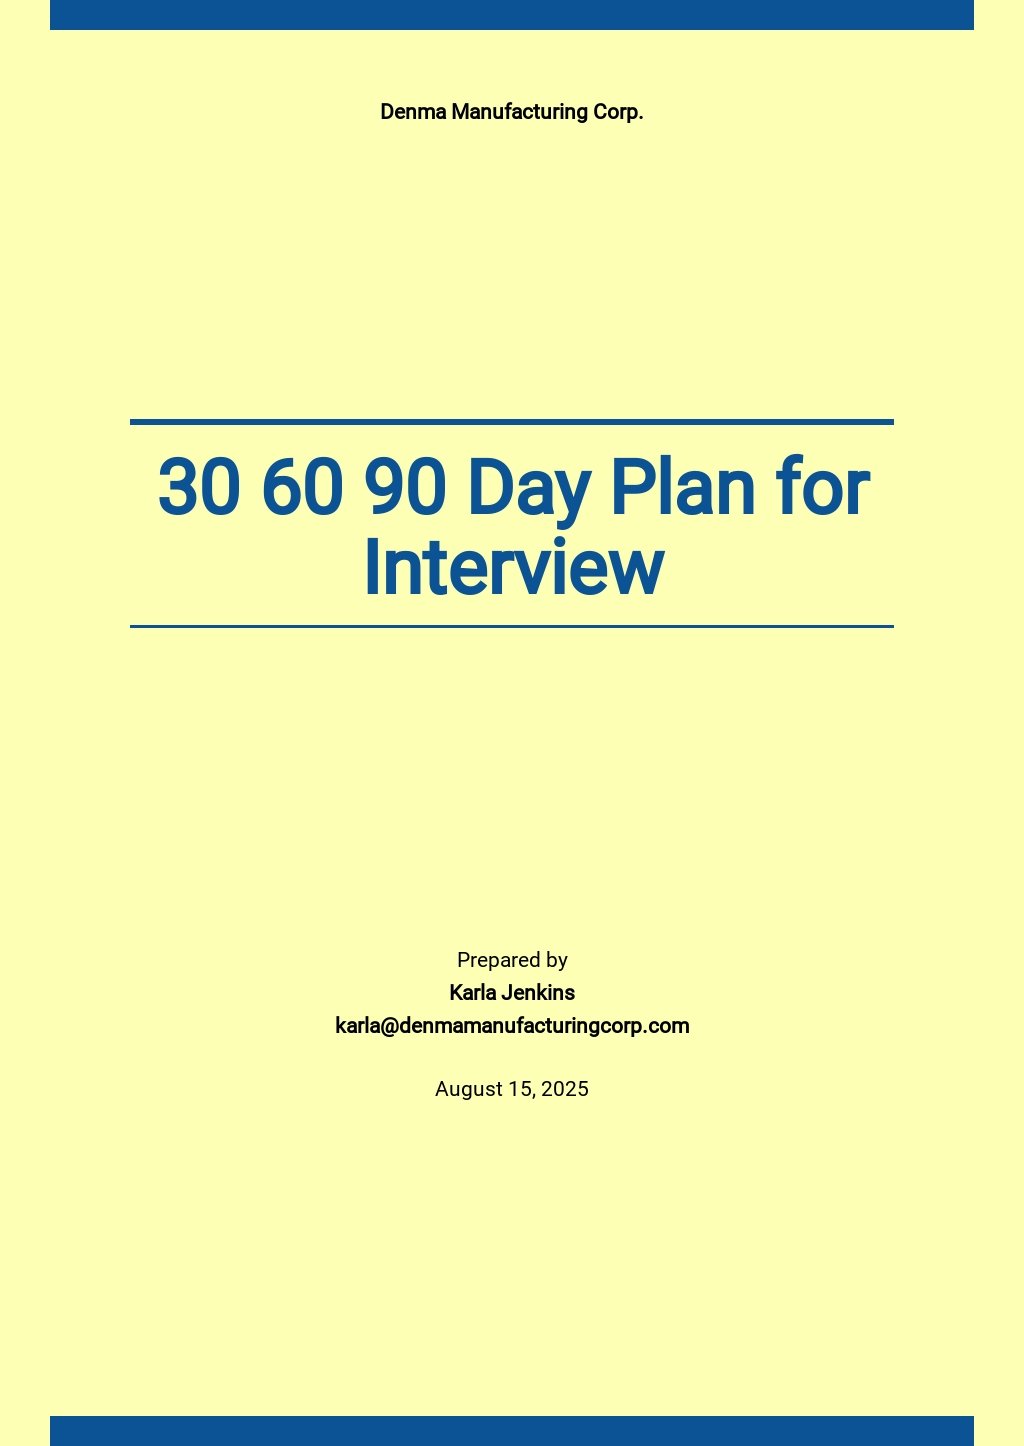 30 60 90 Day Plan Template for Interview.jpe